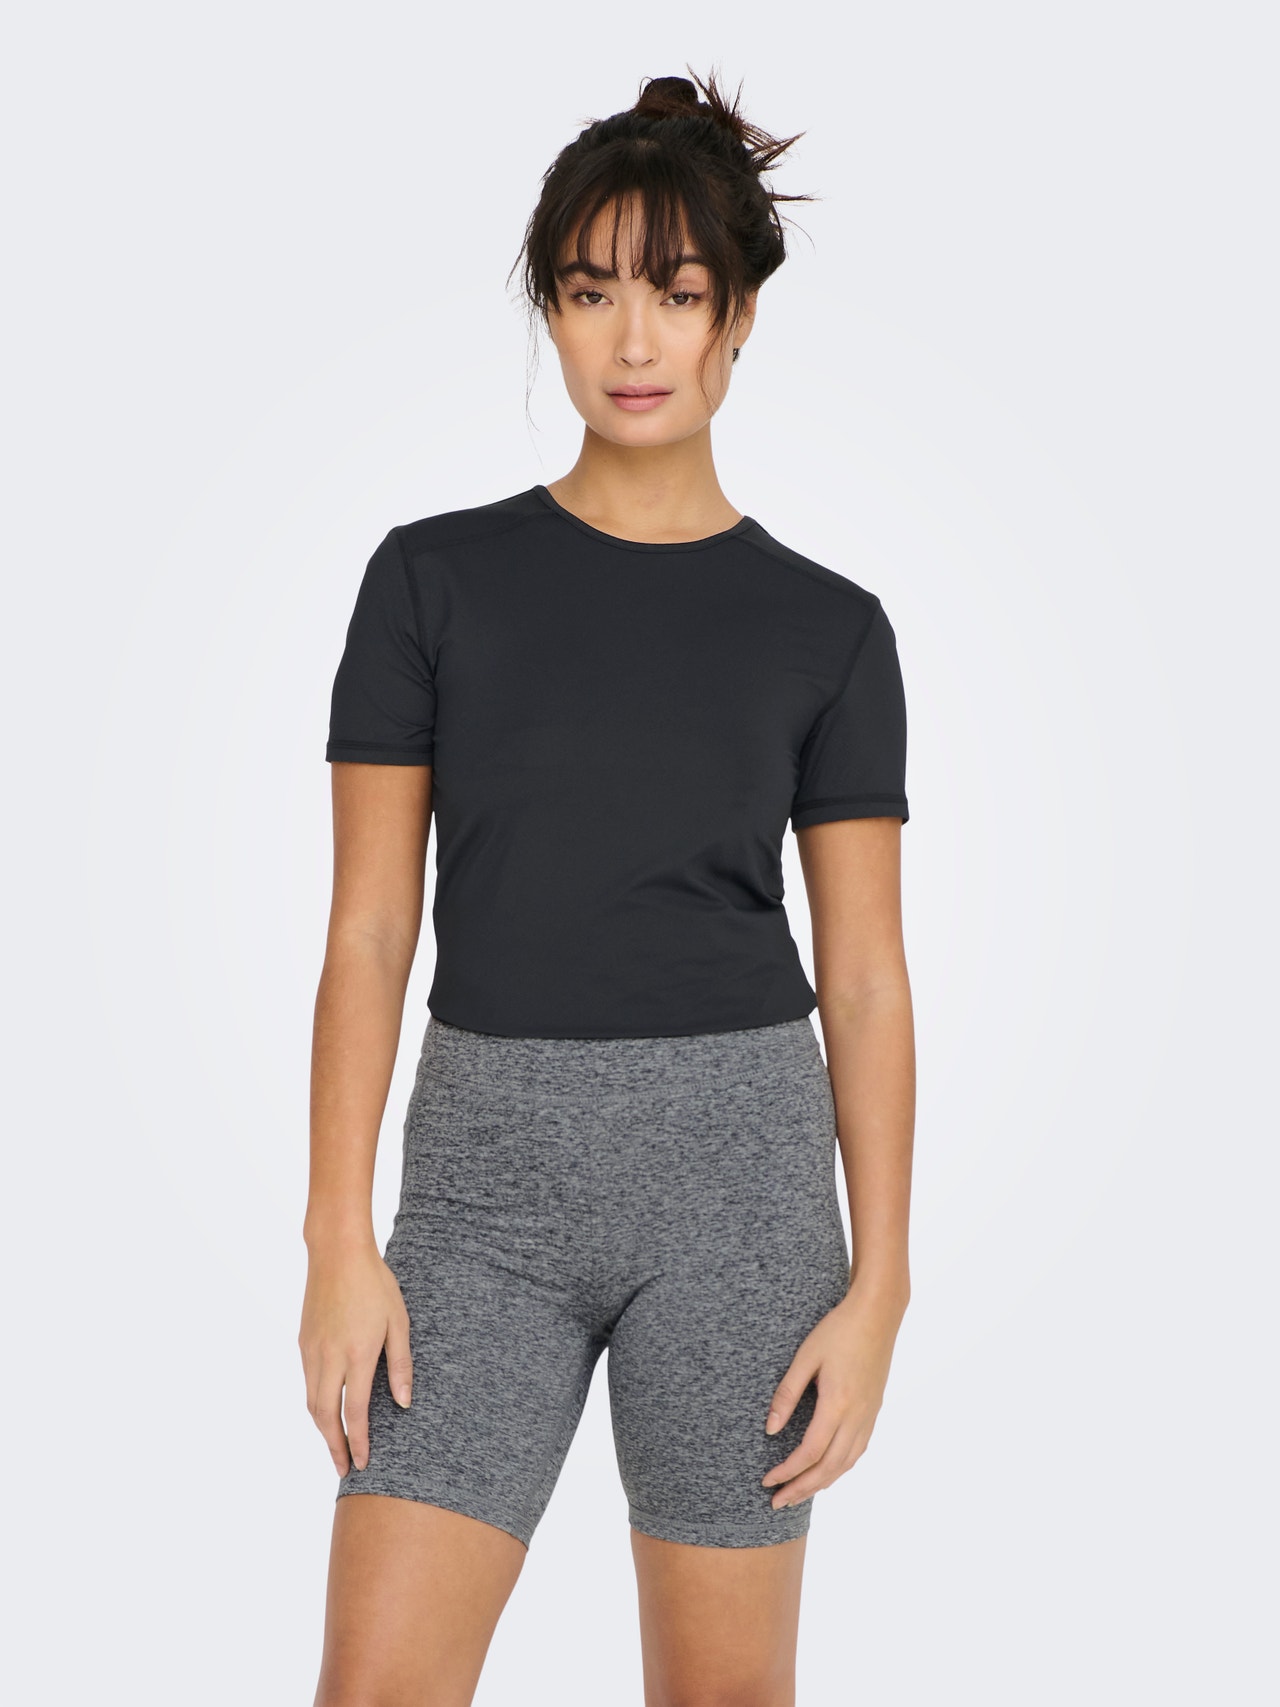 ONLY Solid colored Training Tee -Black - 15283412